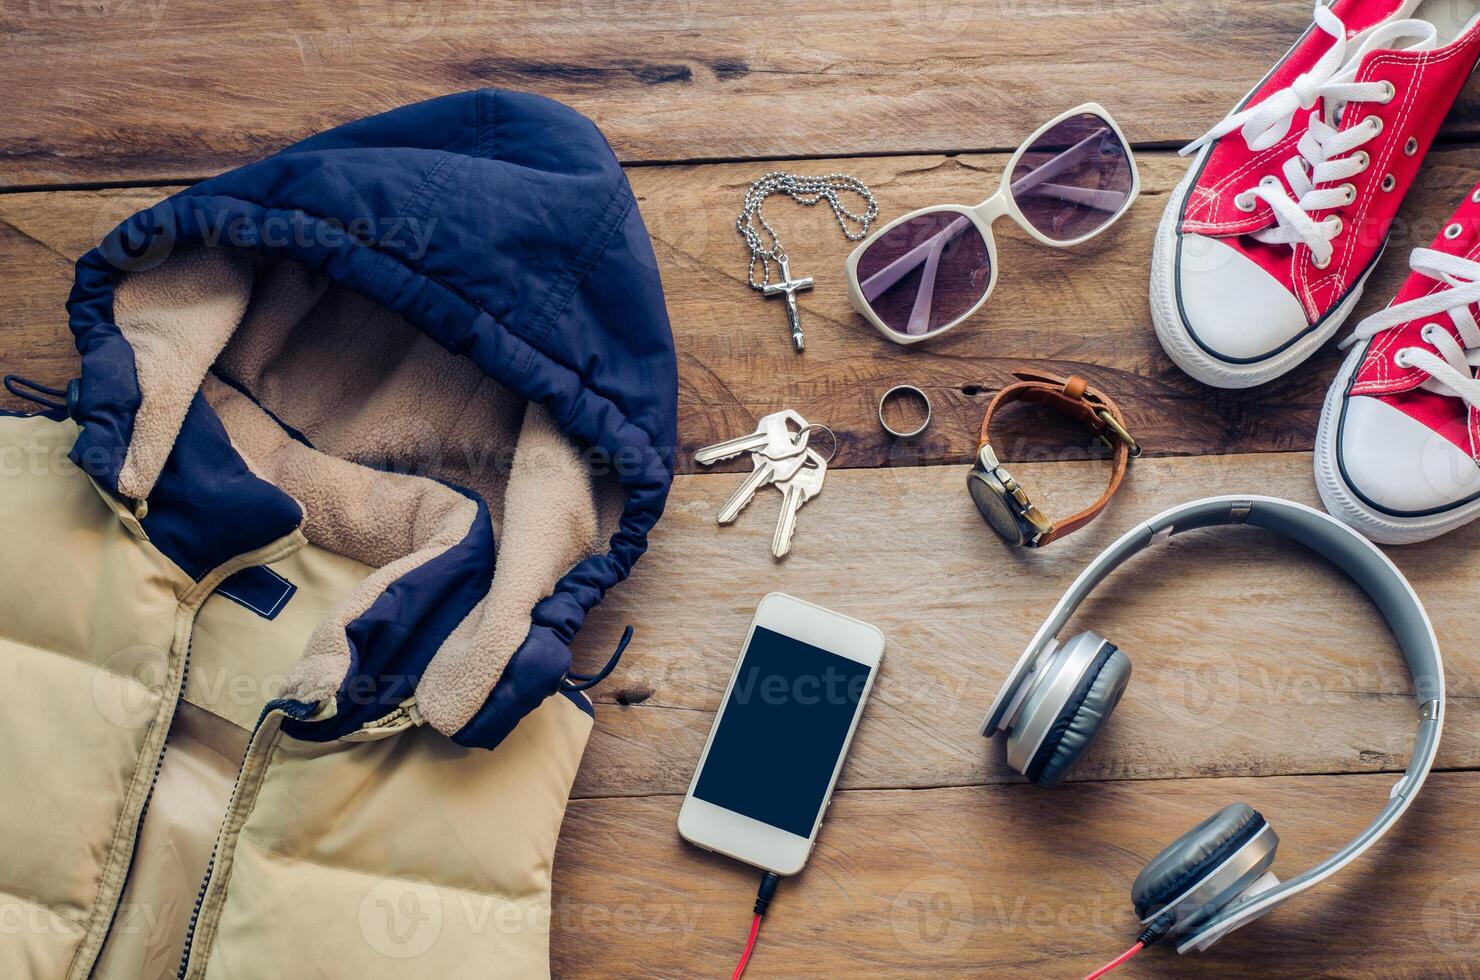 Travel Clothing accessories on wooden floor for the trip photo